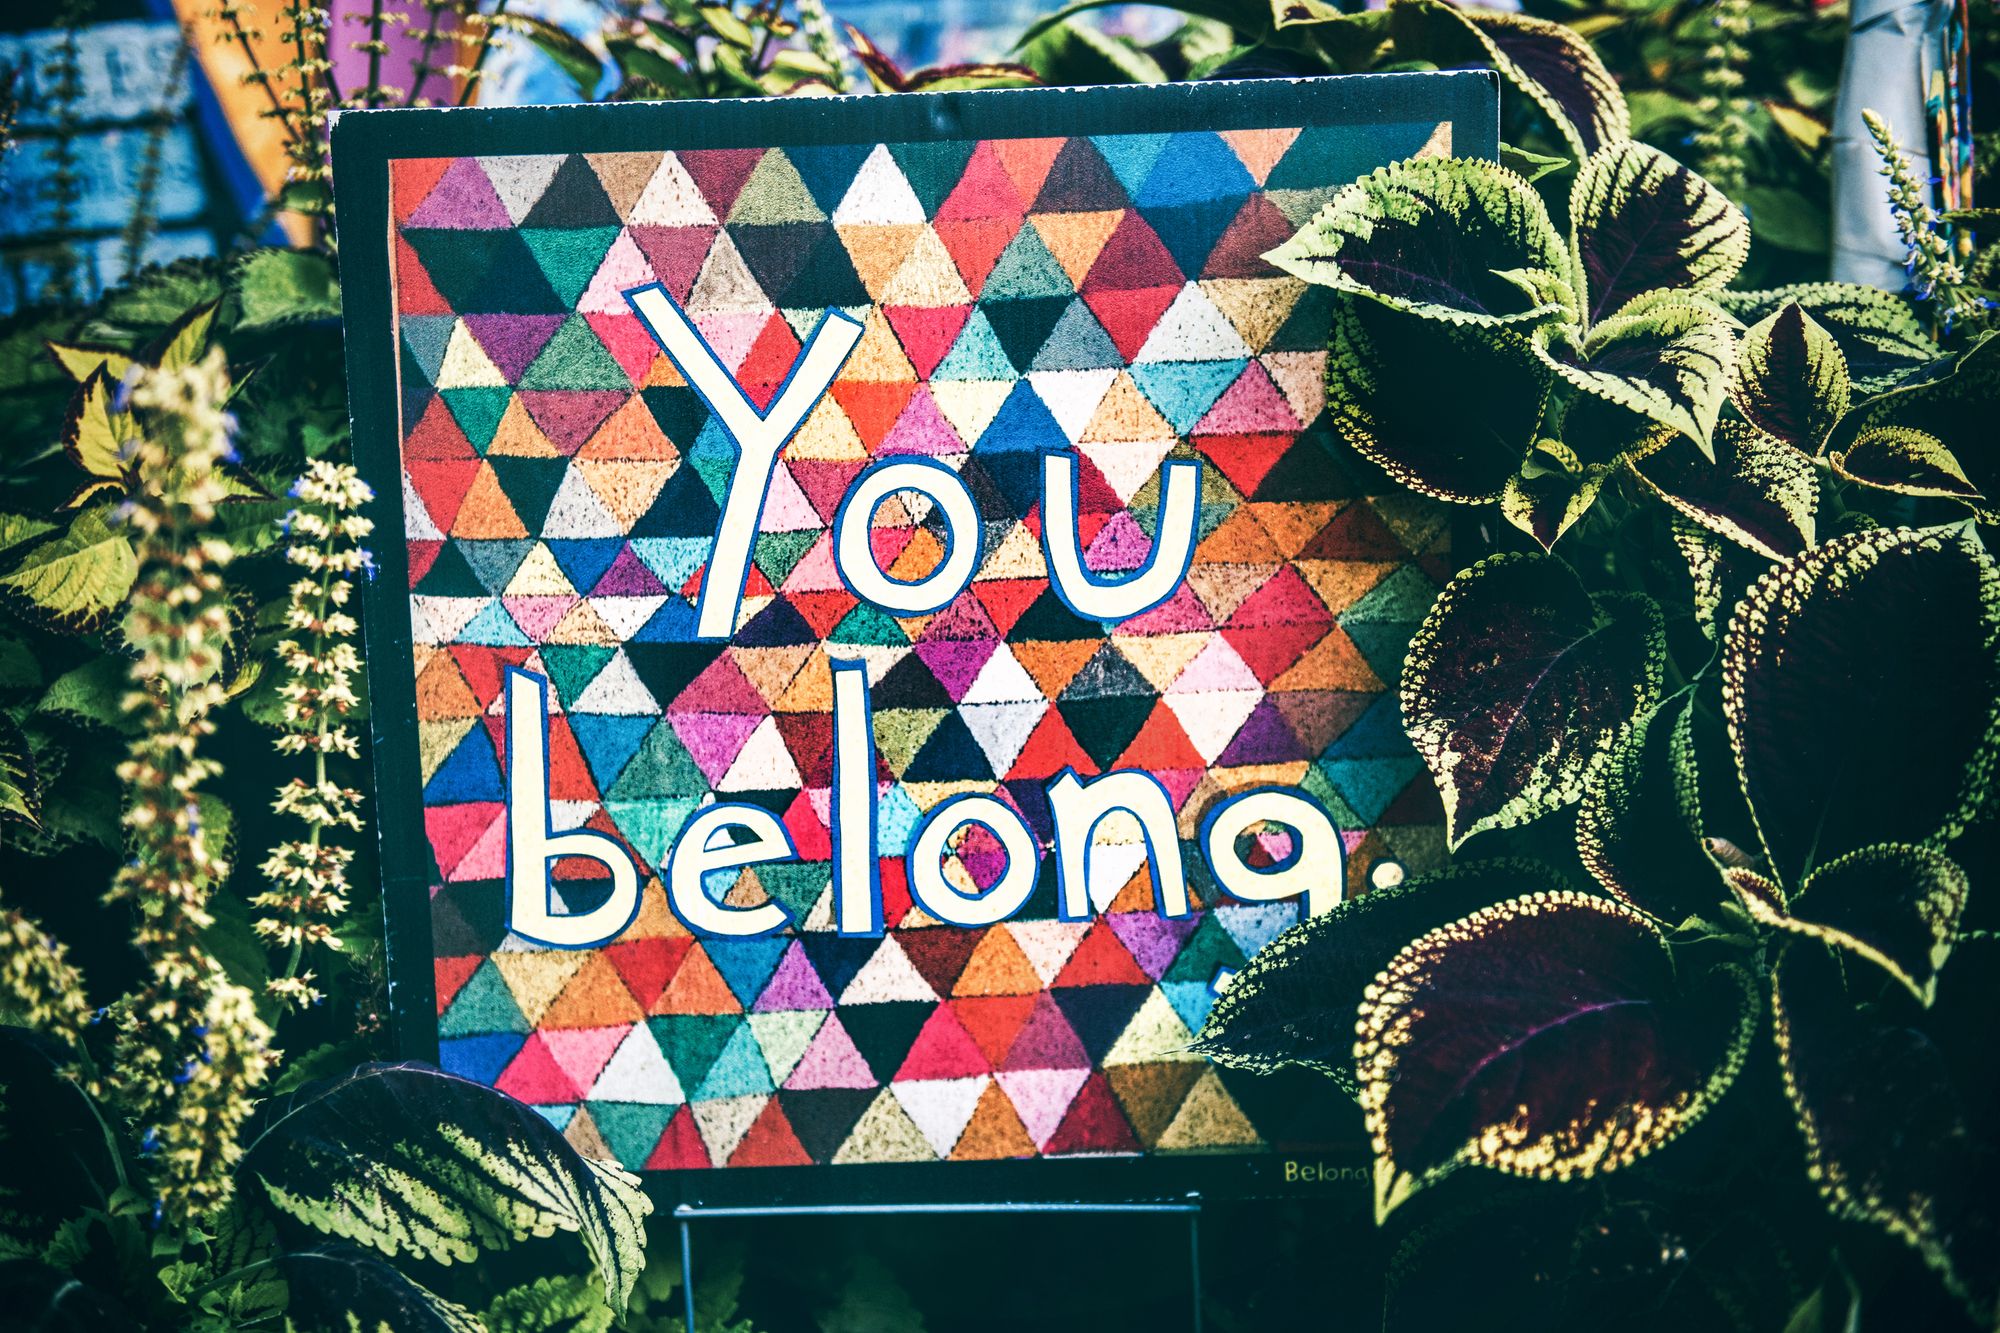 beautiful and colorful image with the caption "You Belong"